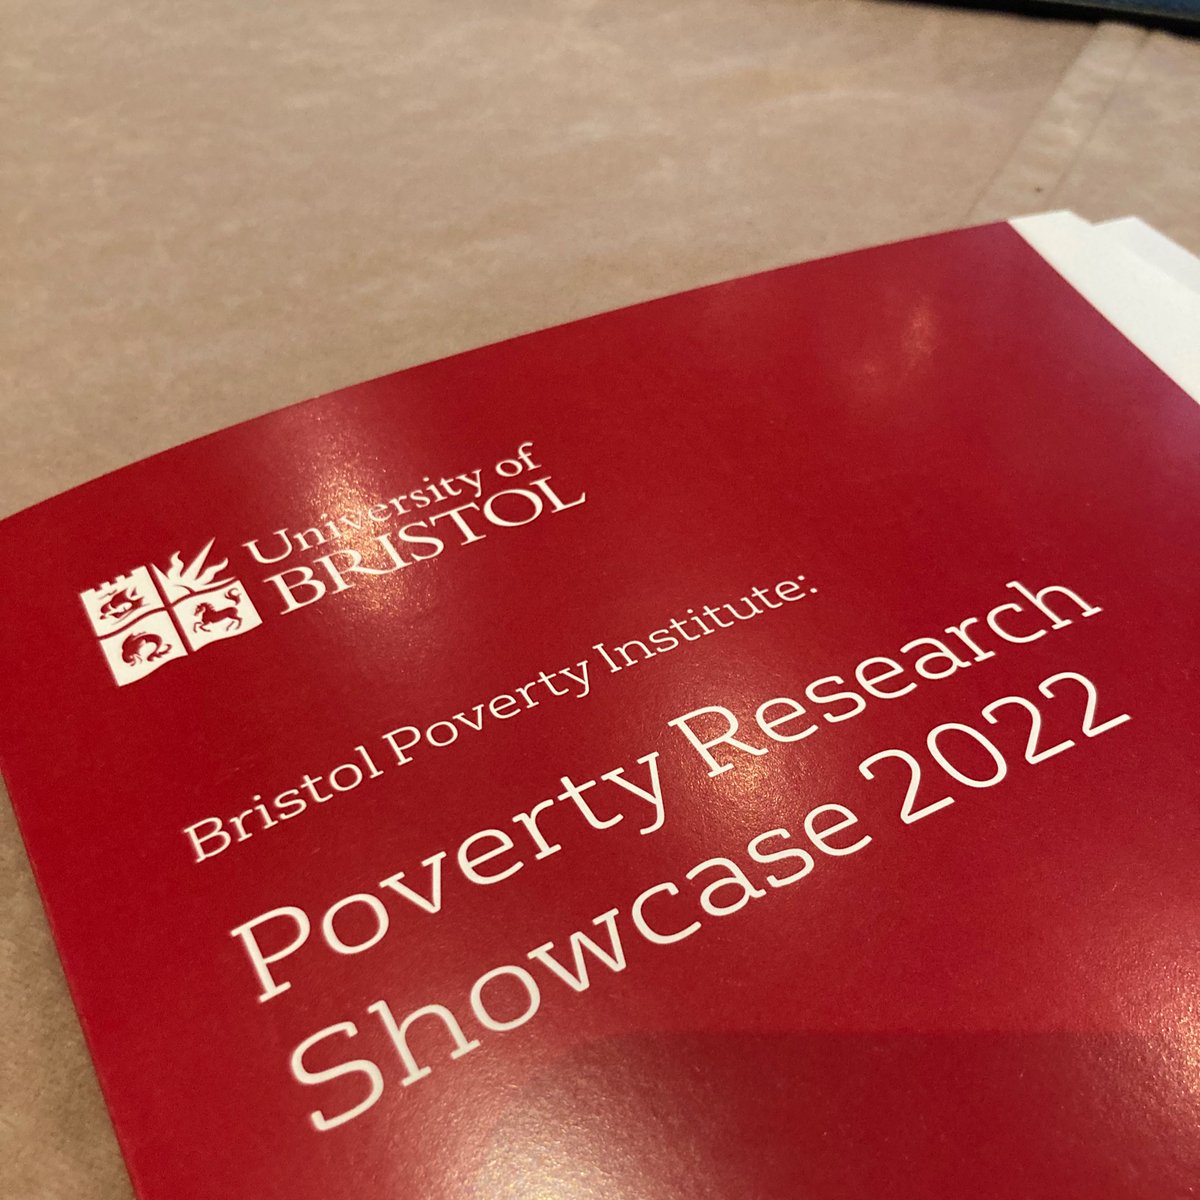 An afternoon hearing all about research by new colleagues at @bristolpoverty. Including recent mapping of the #povertypremium in Britain by @pfrc_uk @PFRC_Jamie ➡️ bit.ly/3OTSqE8